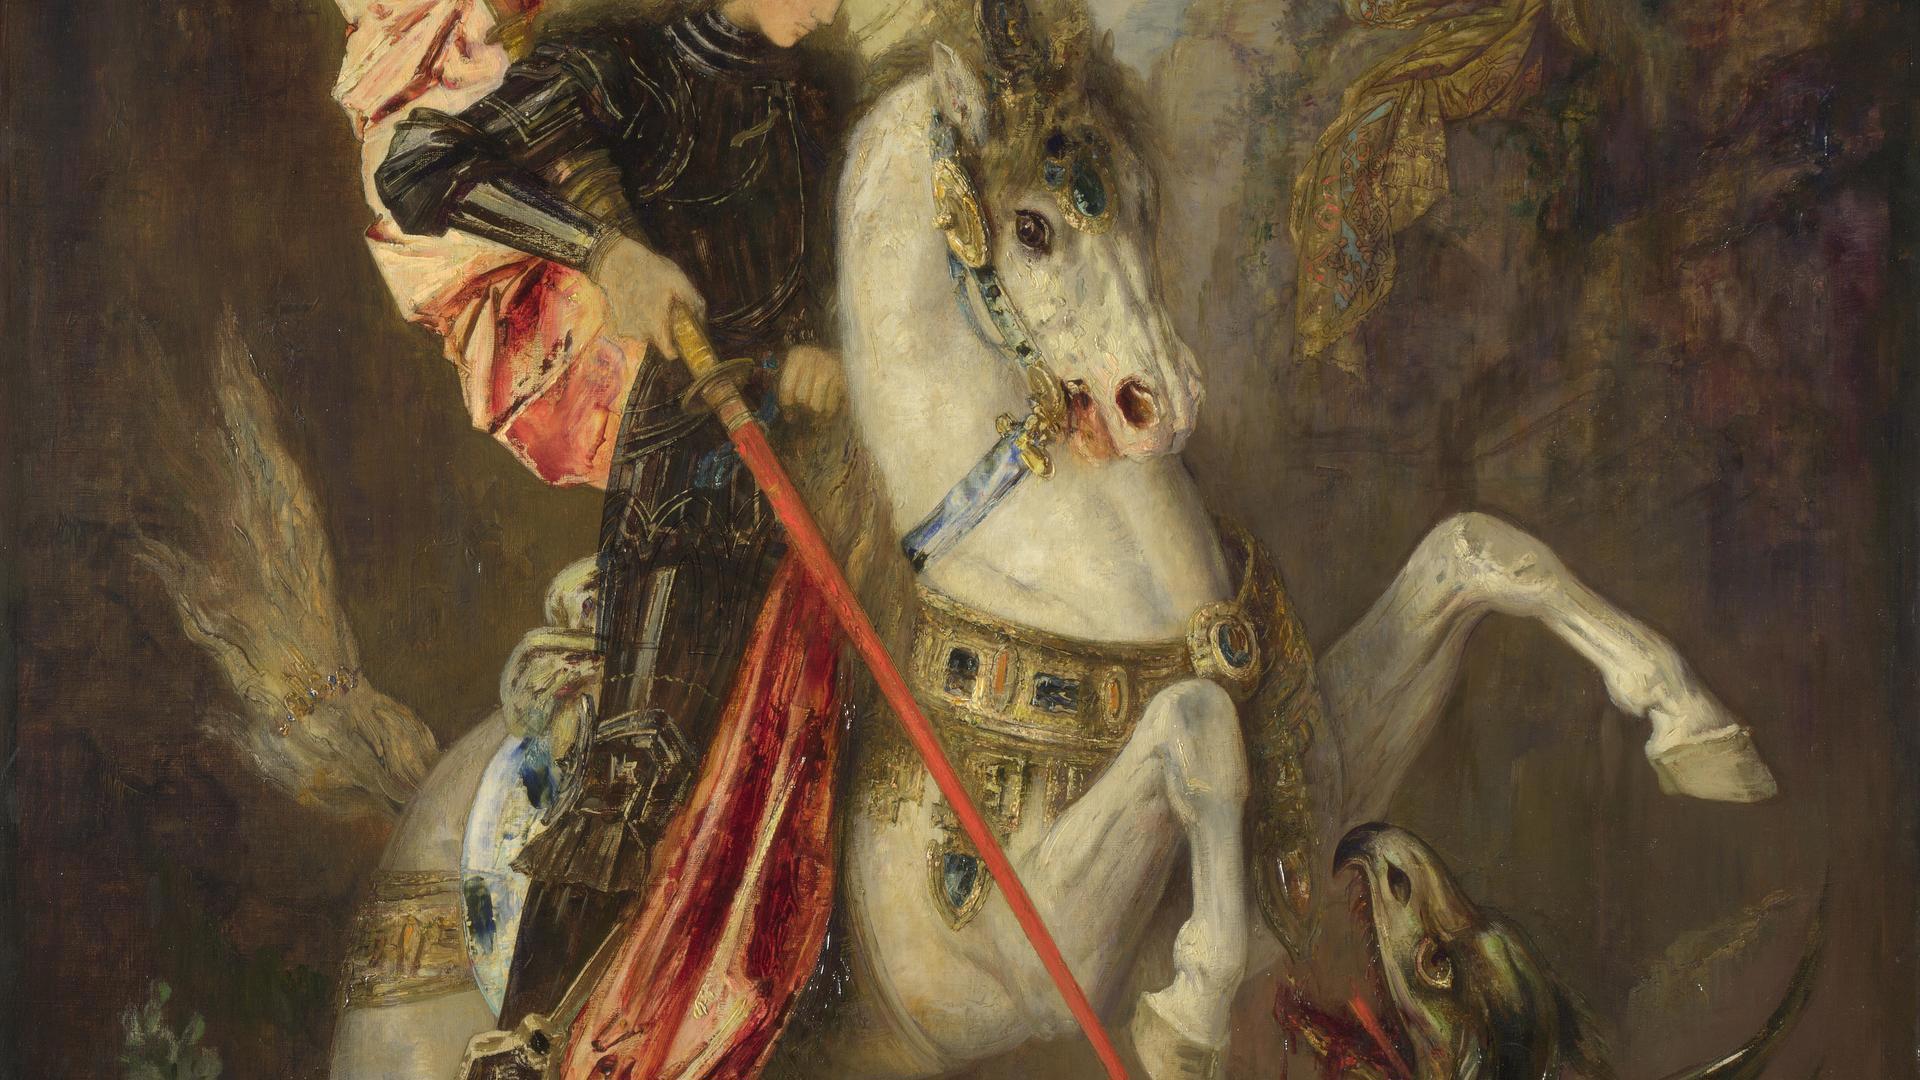 Saint George and the Dragon by Gustave Moreau